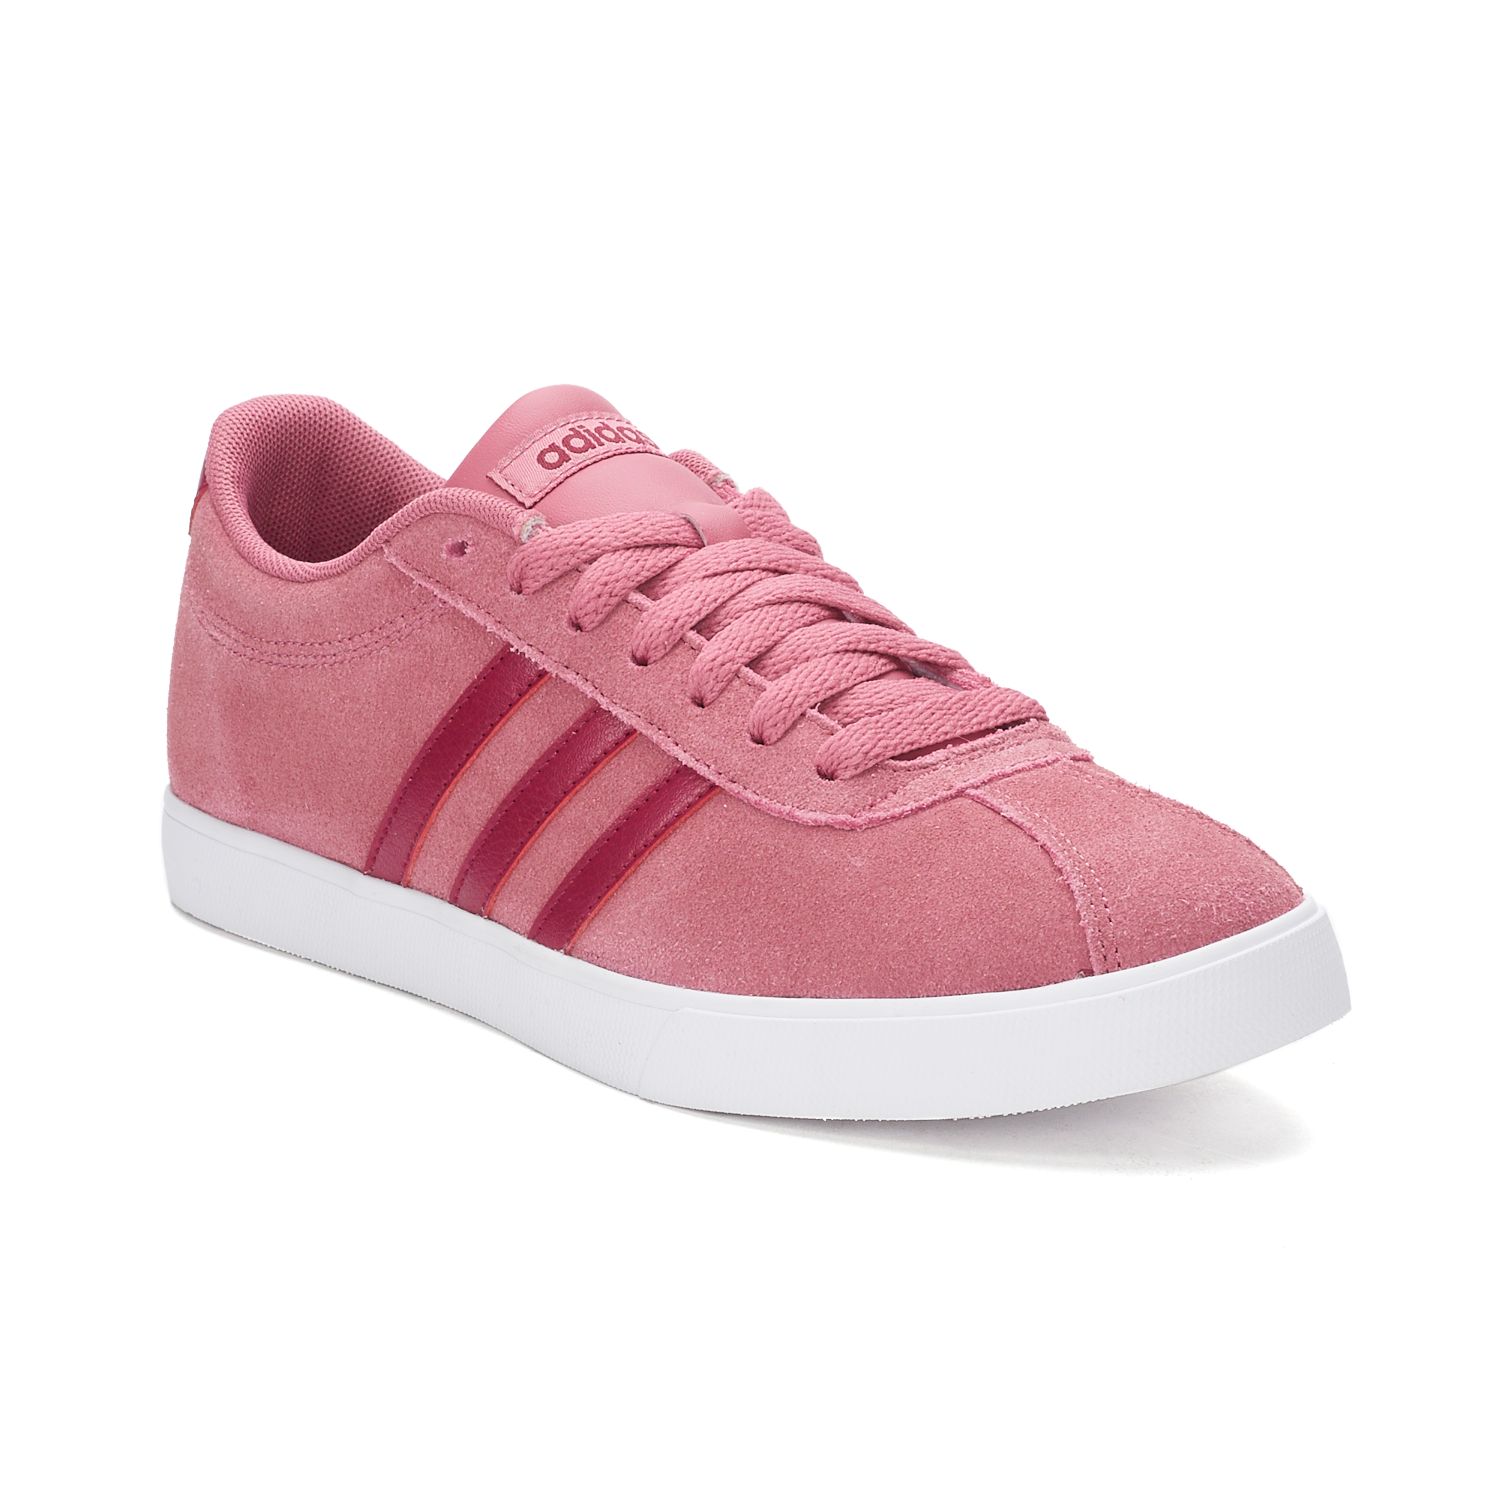 adidas courtset women's suede sneakers